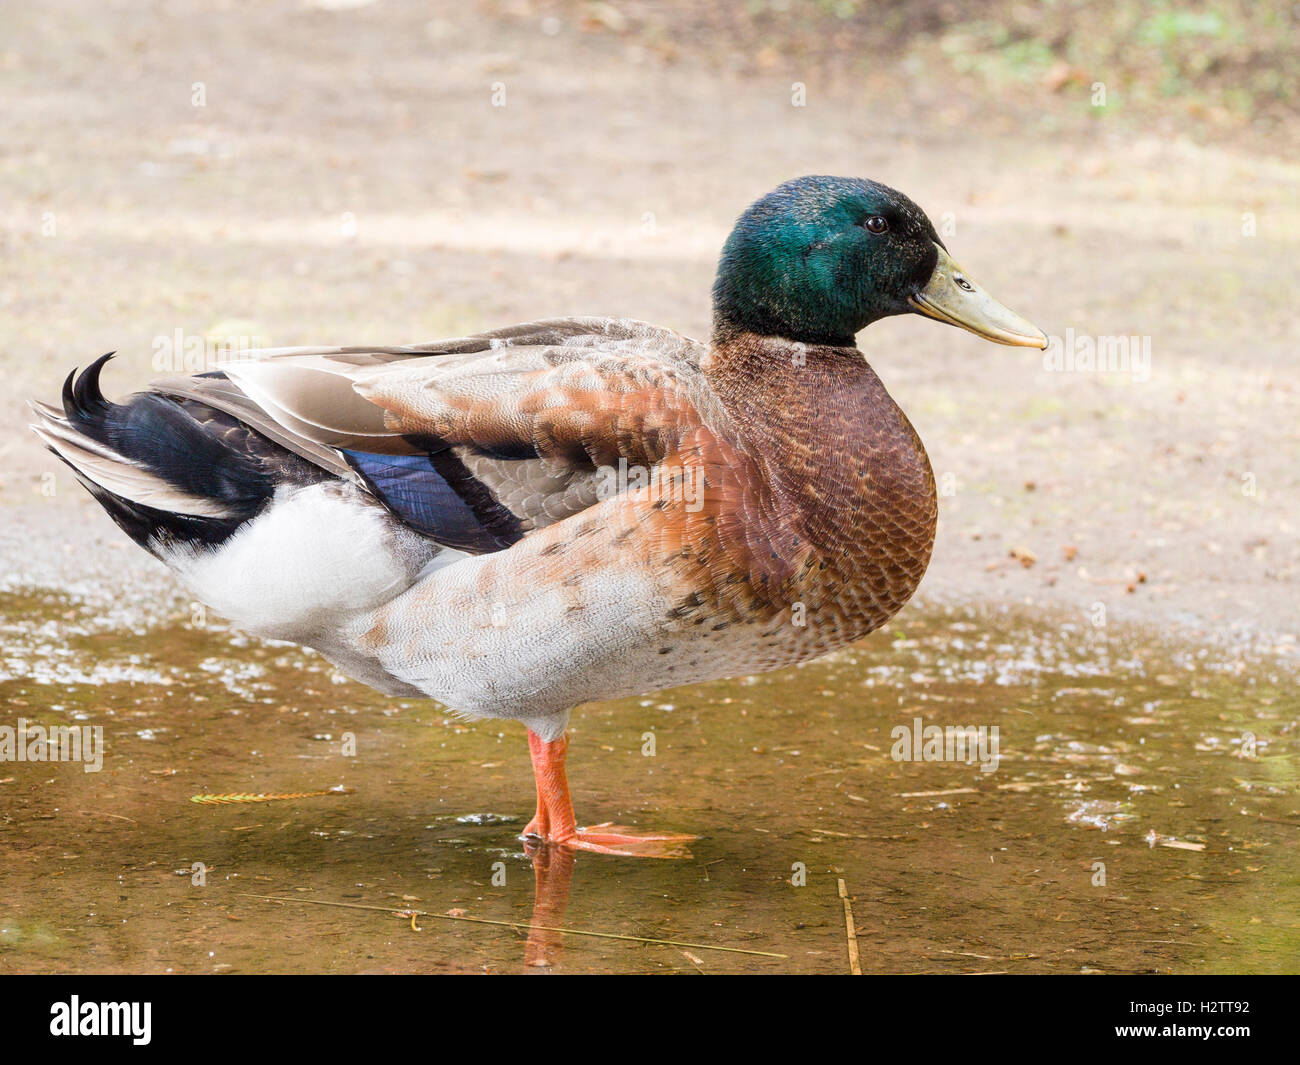 Side view of a mallard duck in a puddle. A full side view of a mail mallard duck standing in a very shallow puddle of water. Stock Photo